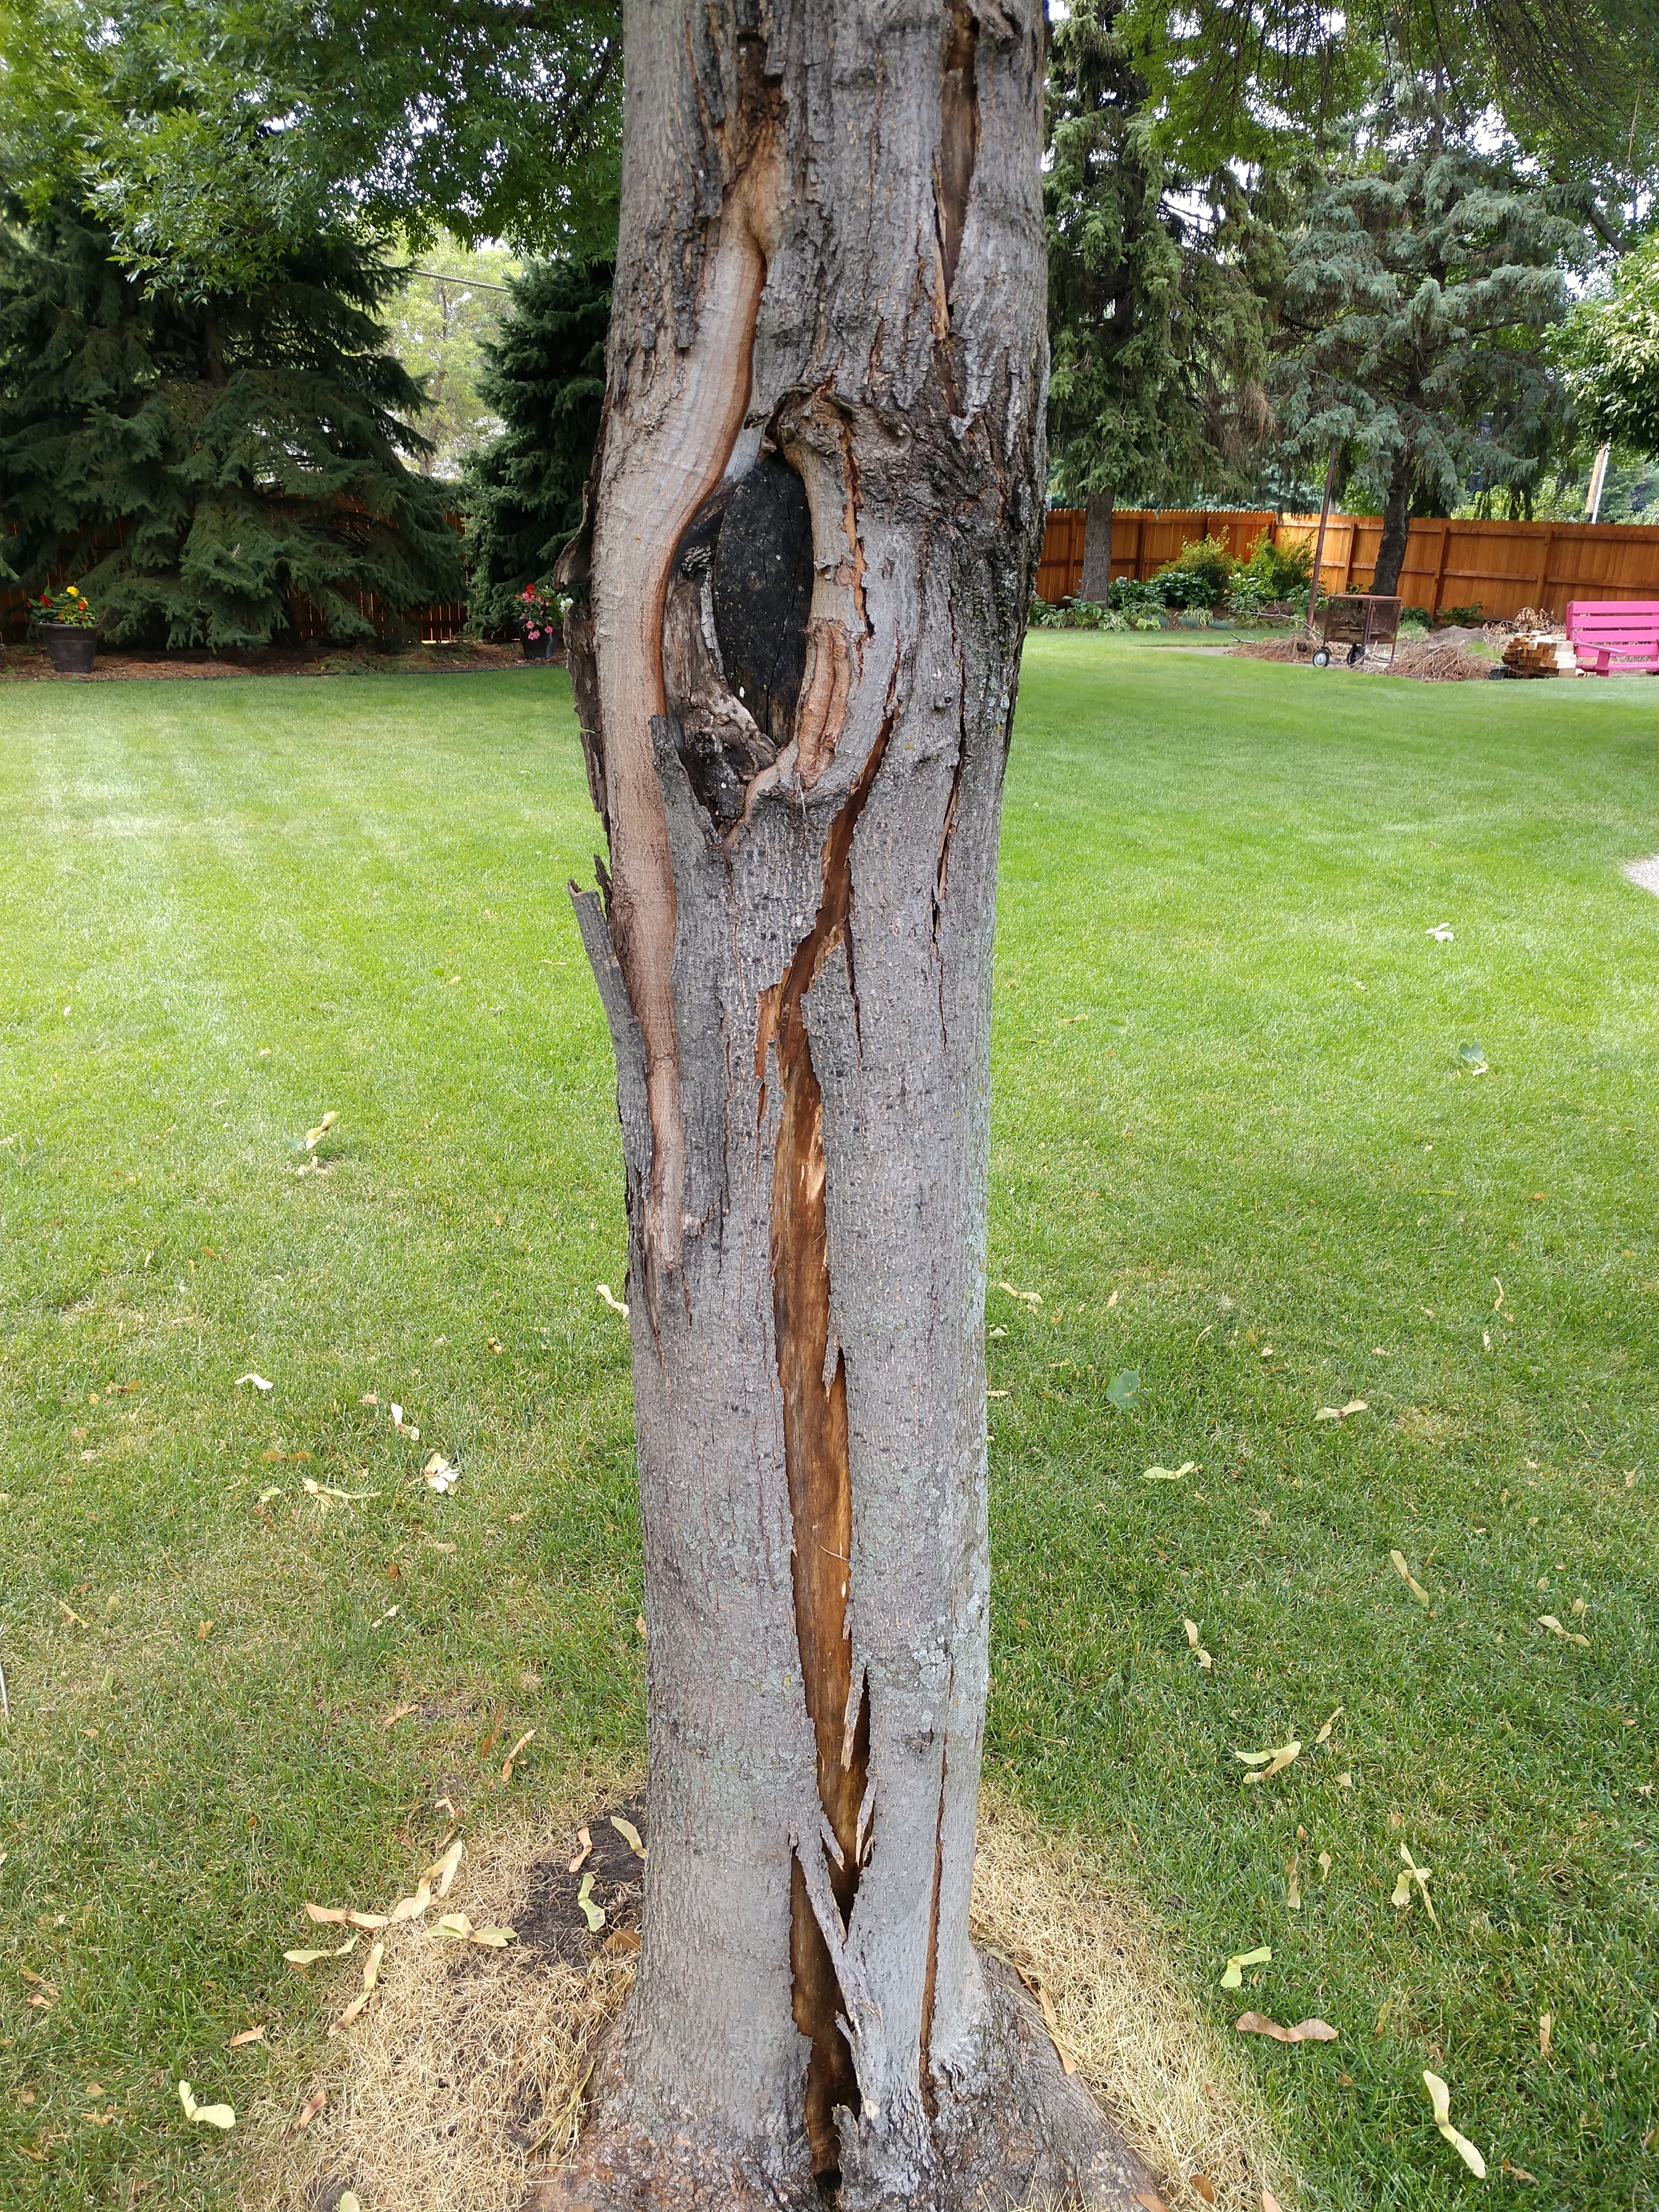 Norway Maple Bark Issue Ask Extension